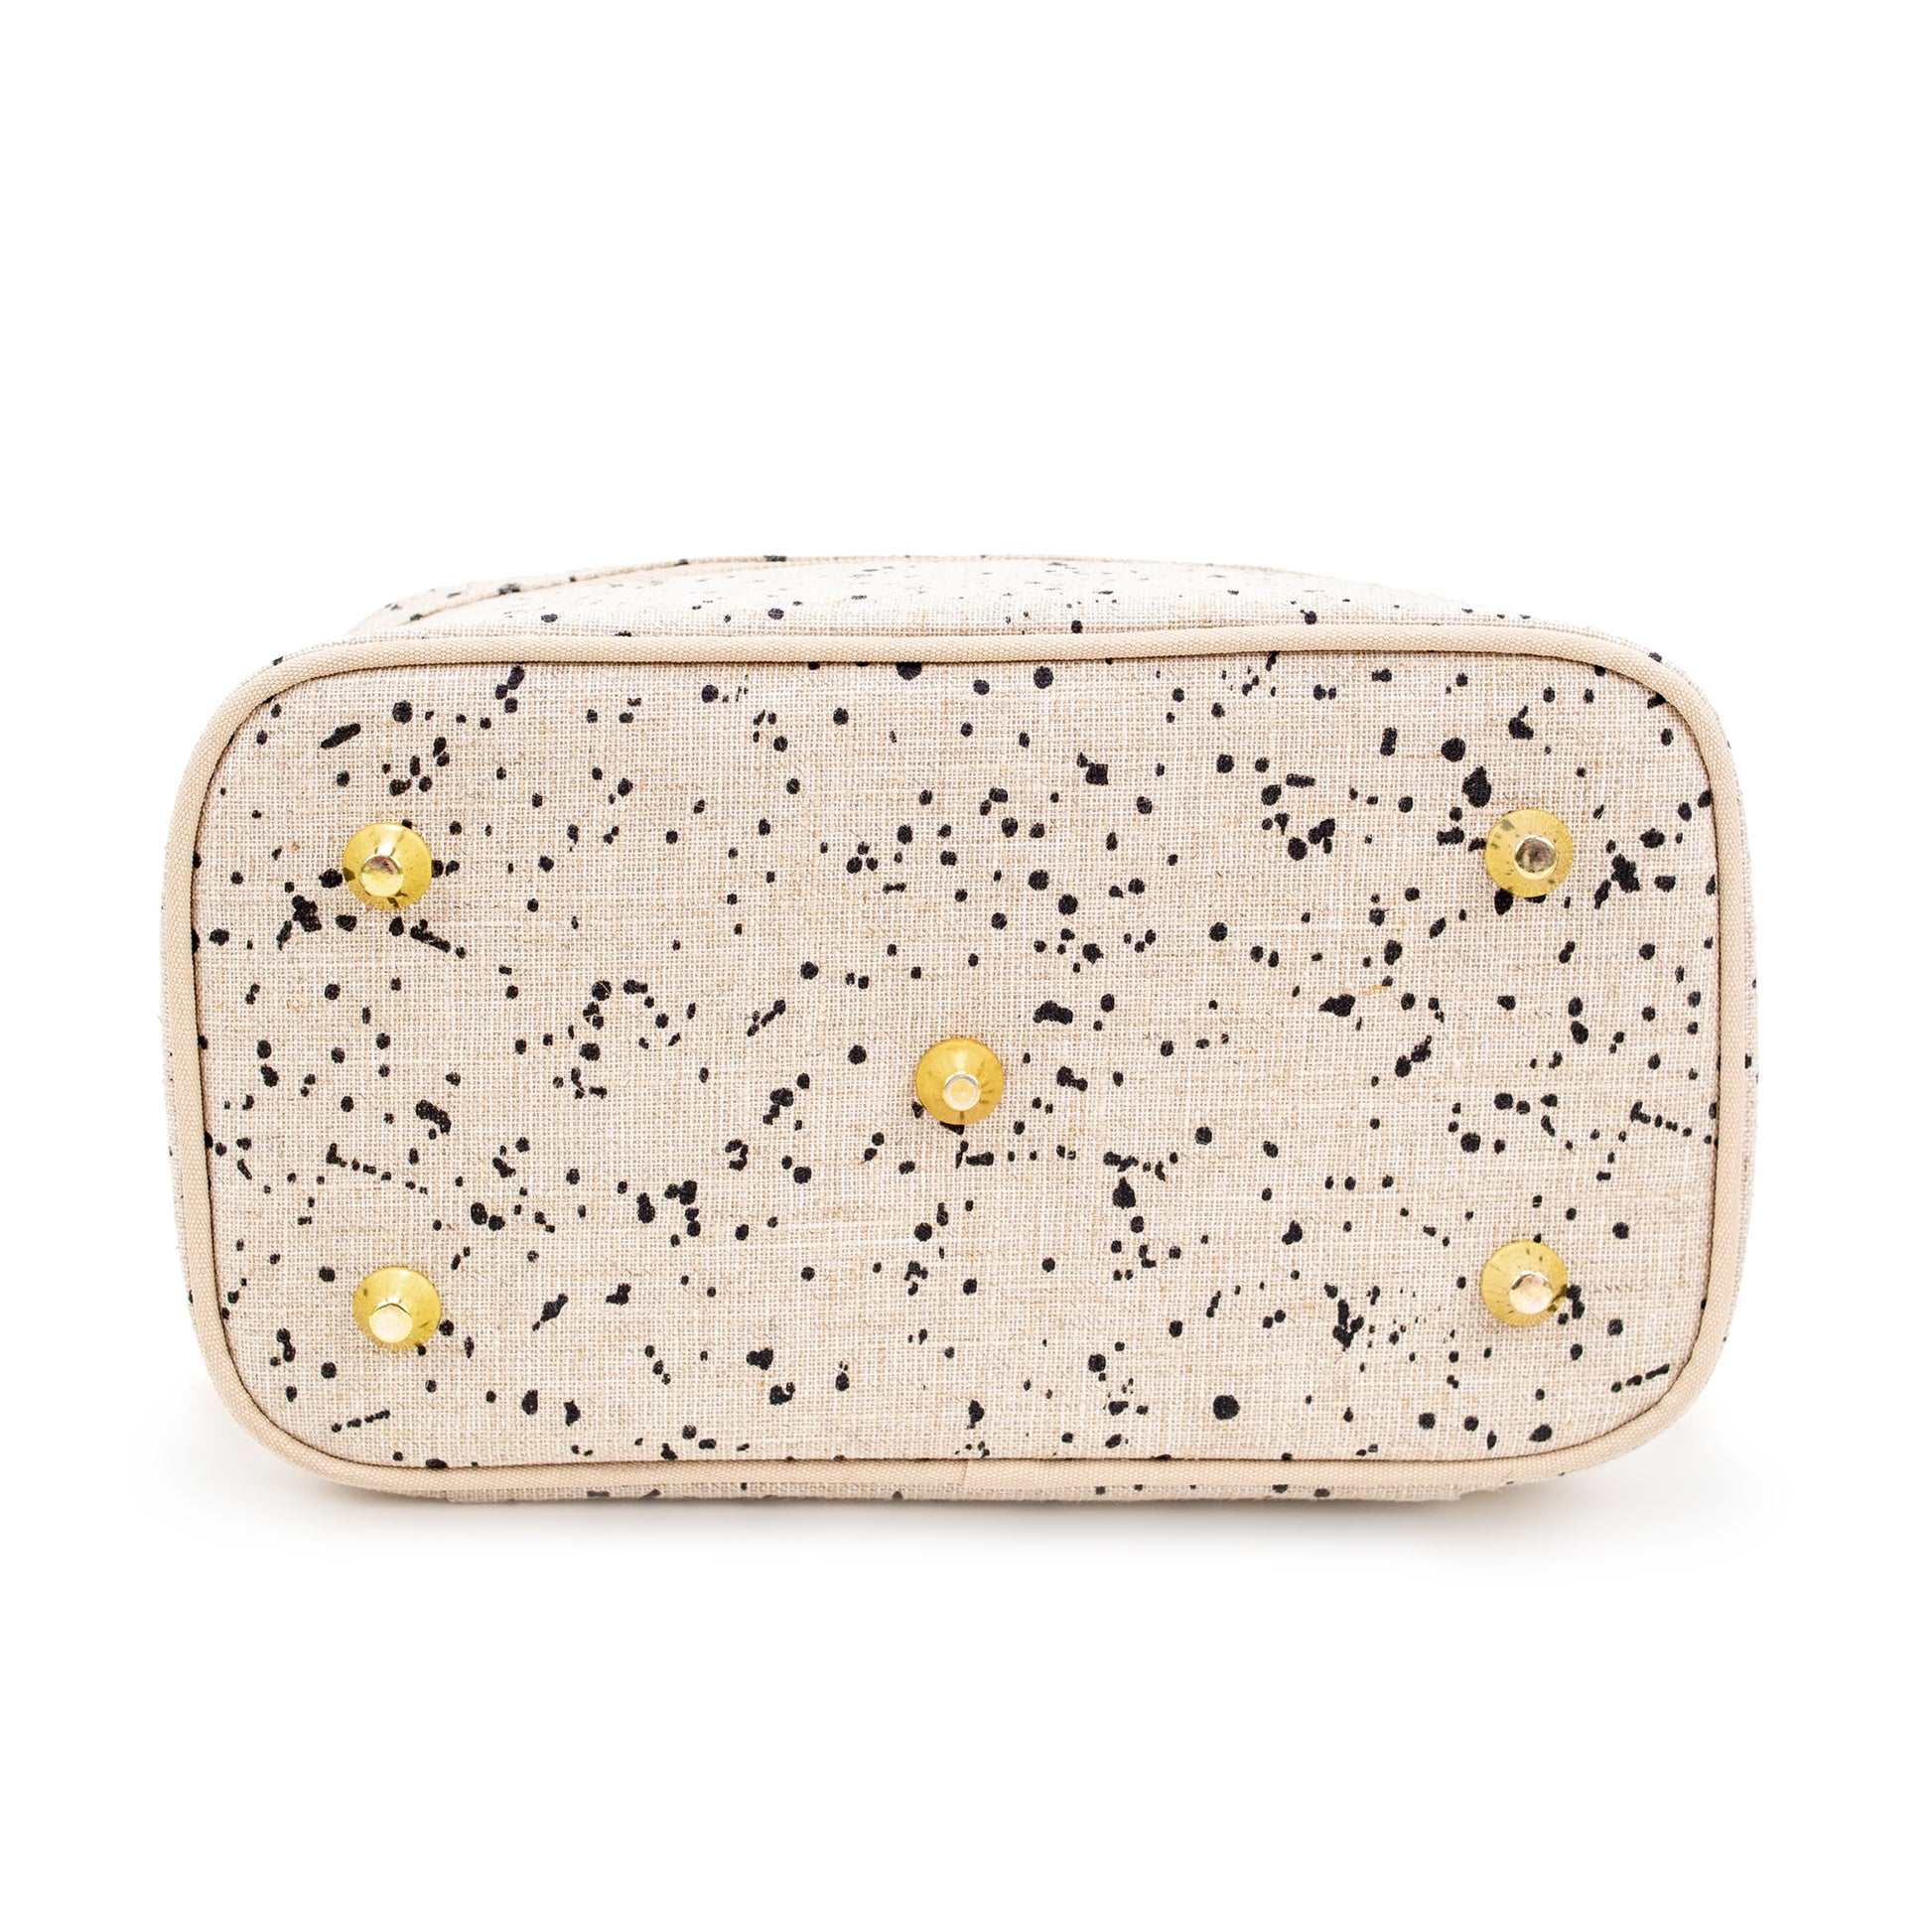 Soyoung Ink Splatter Beauty Poche - Ever Simplicity